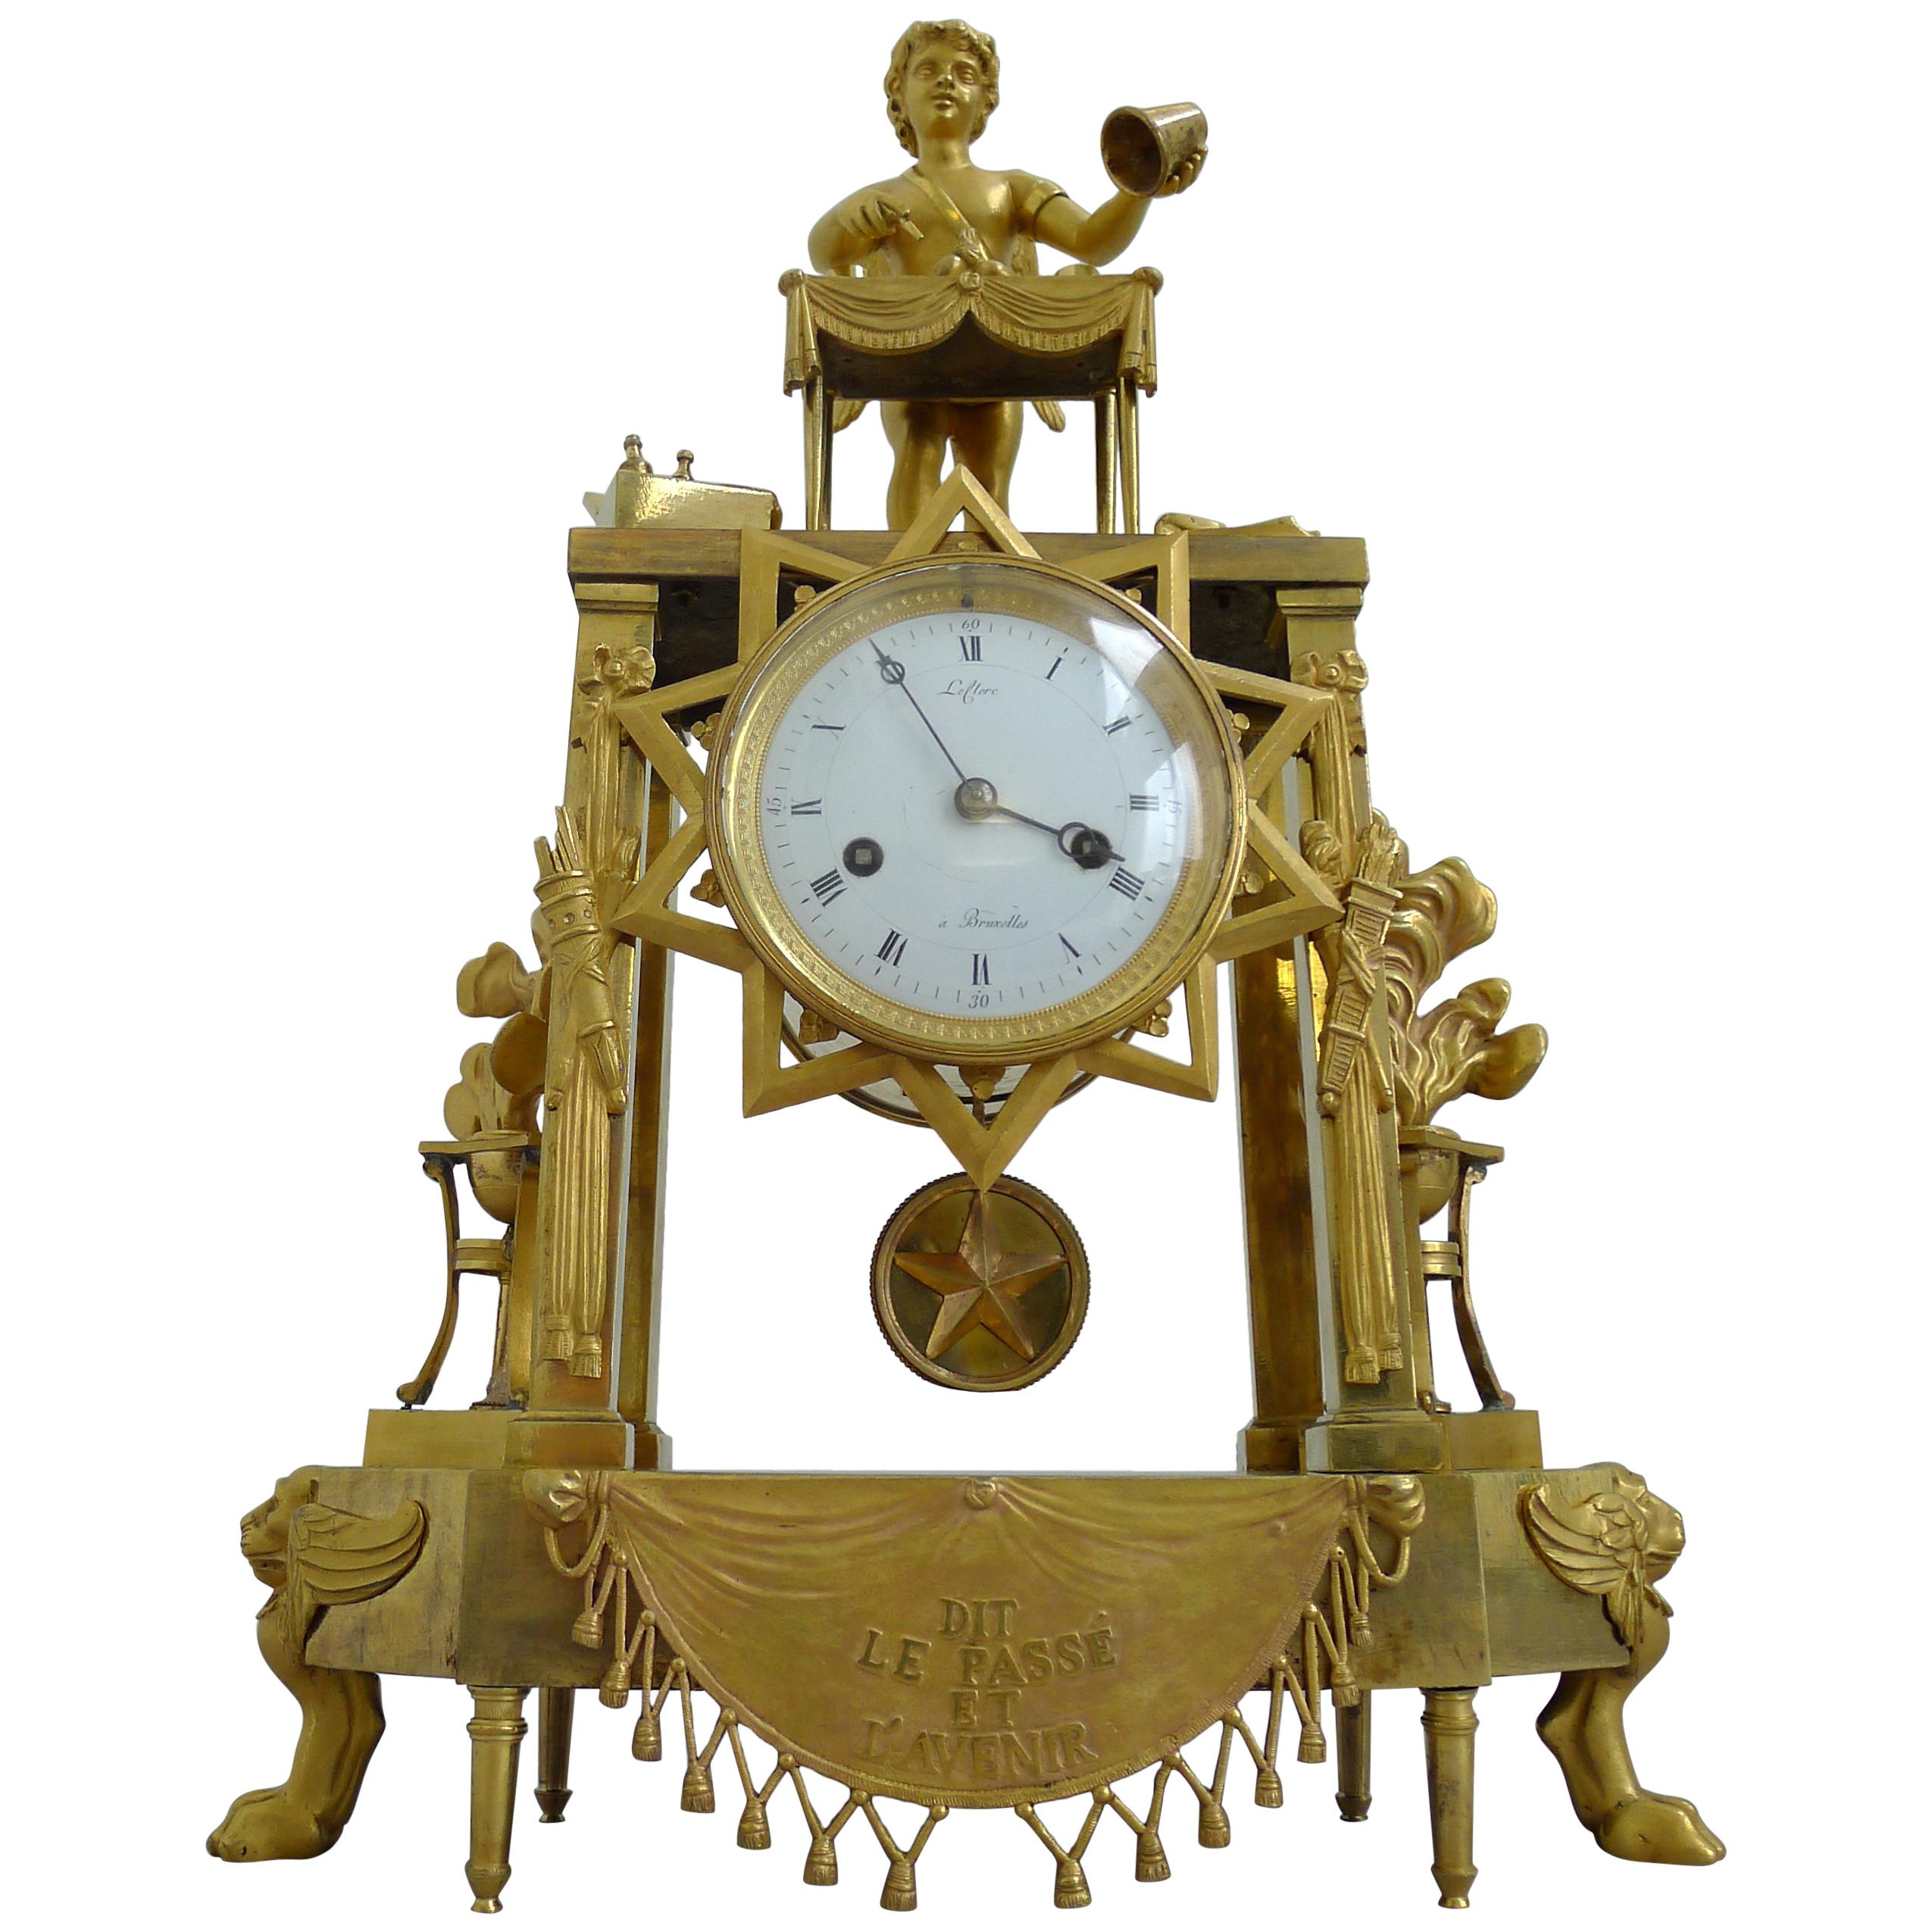 Fine and Rare French Empire Clock of Cupid as Magician Uncovering Flaming Hearts